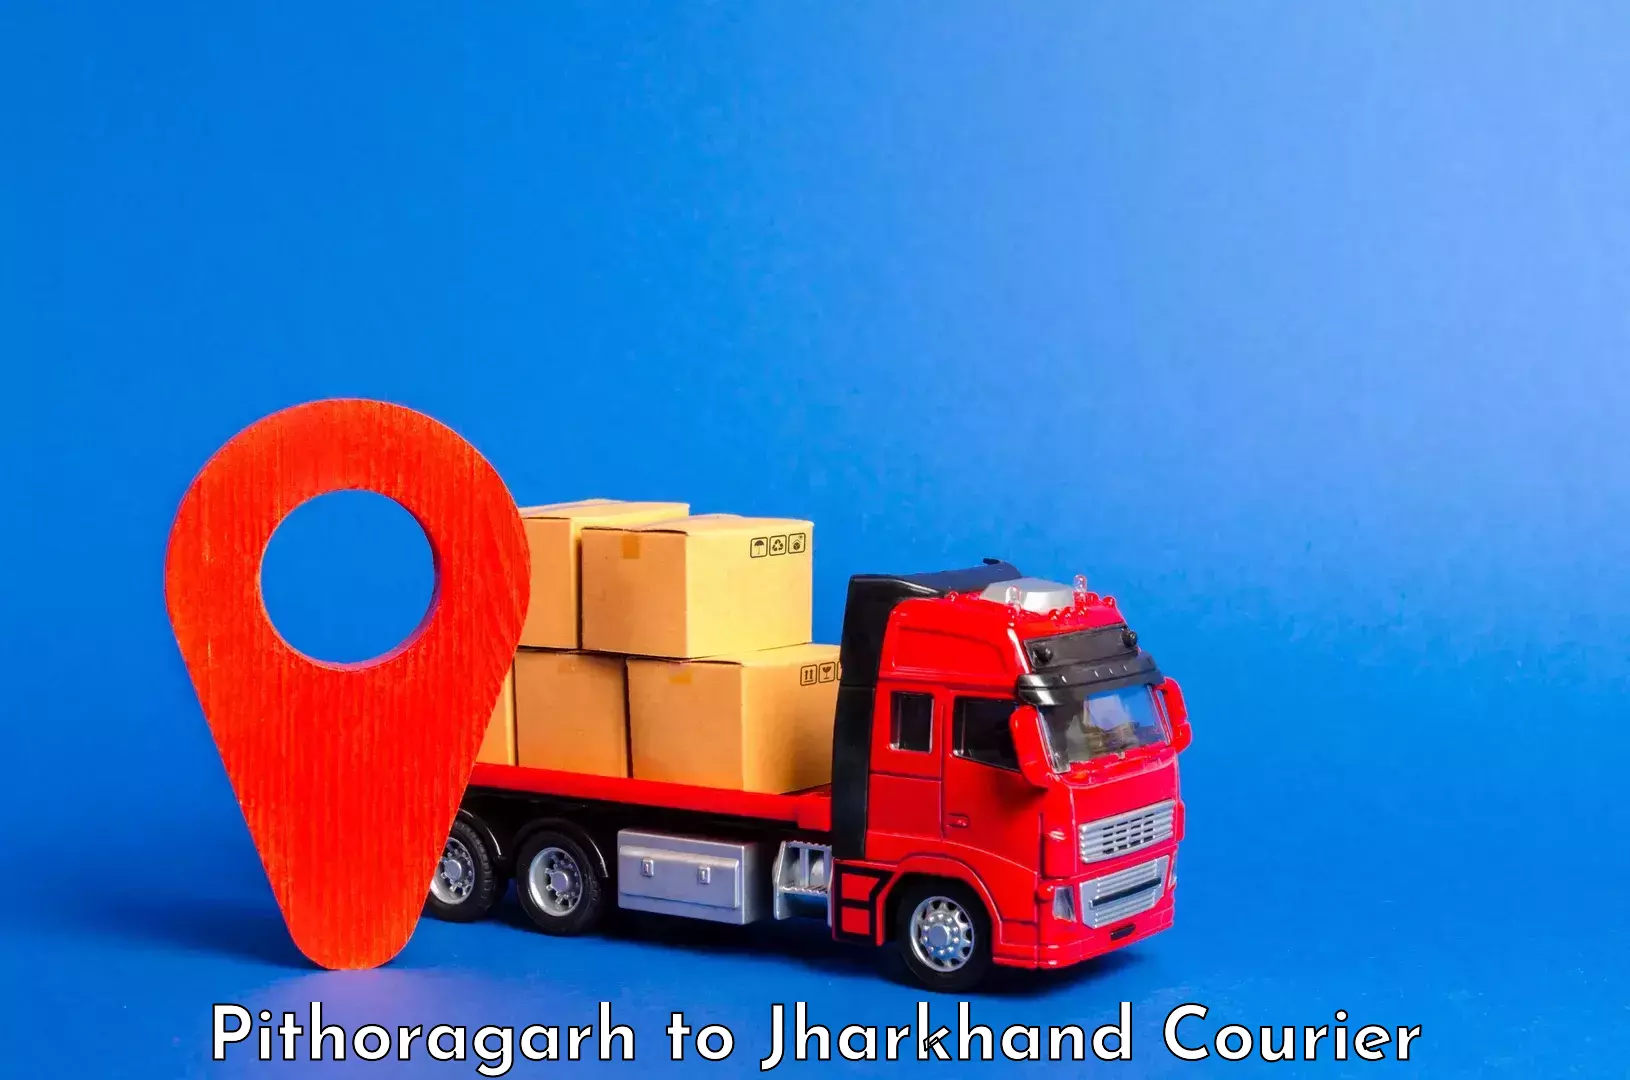 Business luggage transport in Pithoragarh to Jharkhand